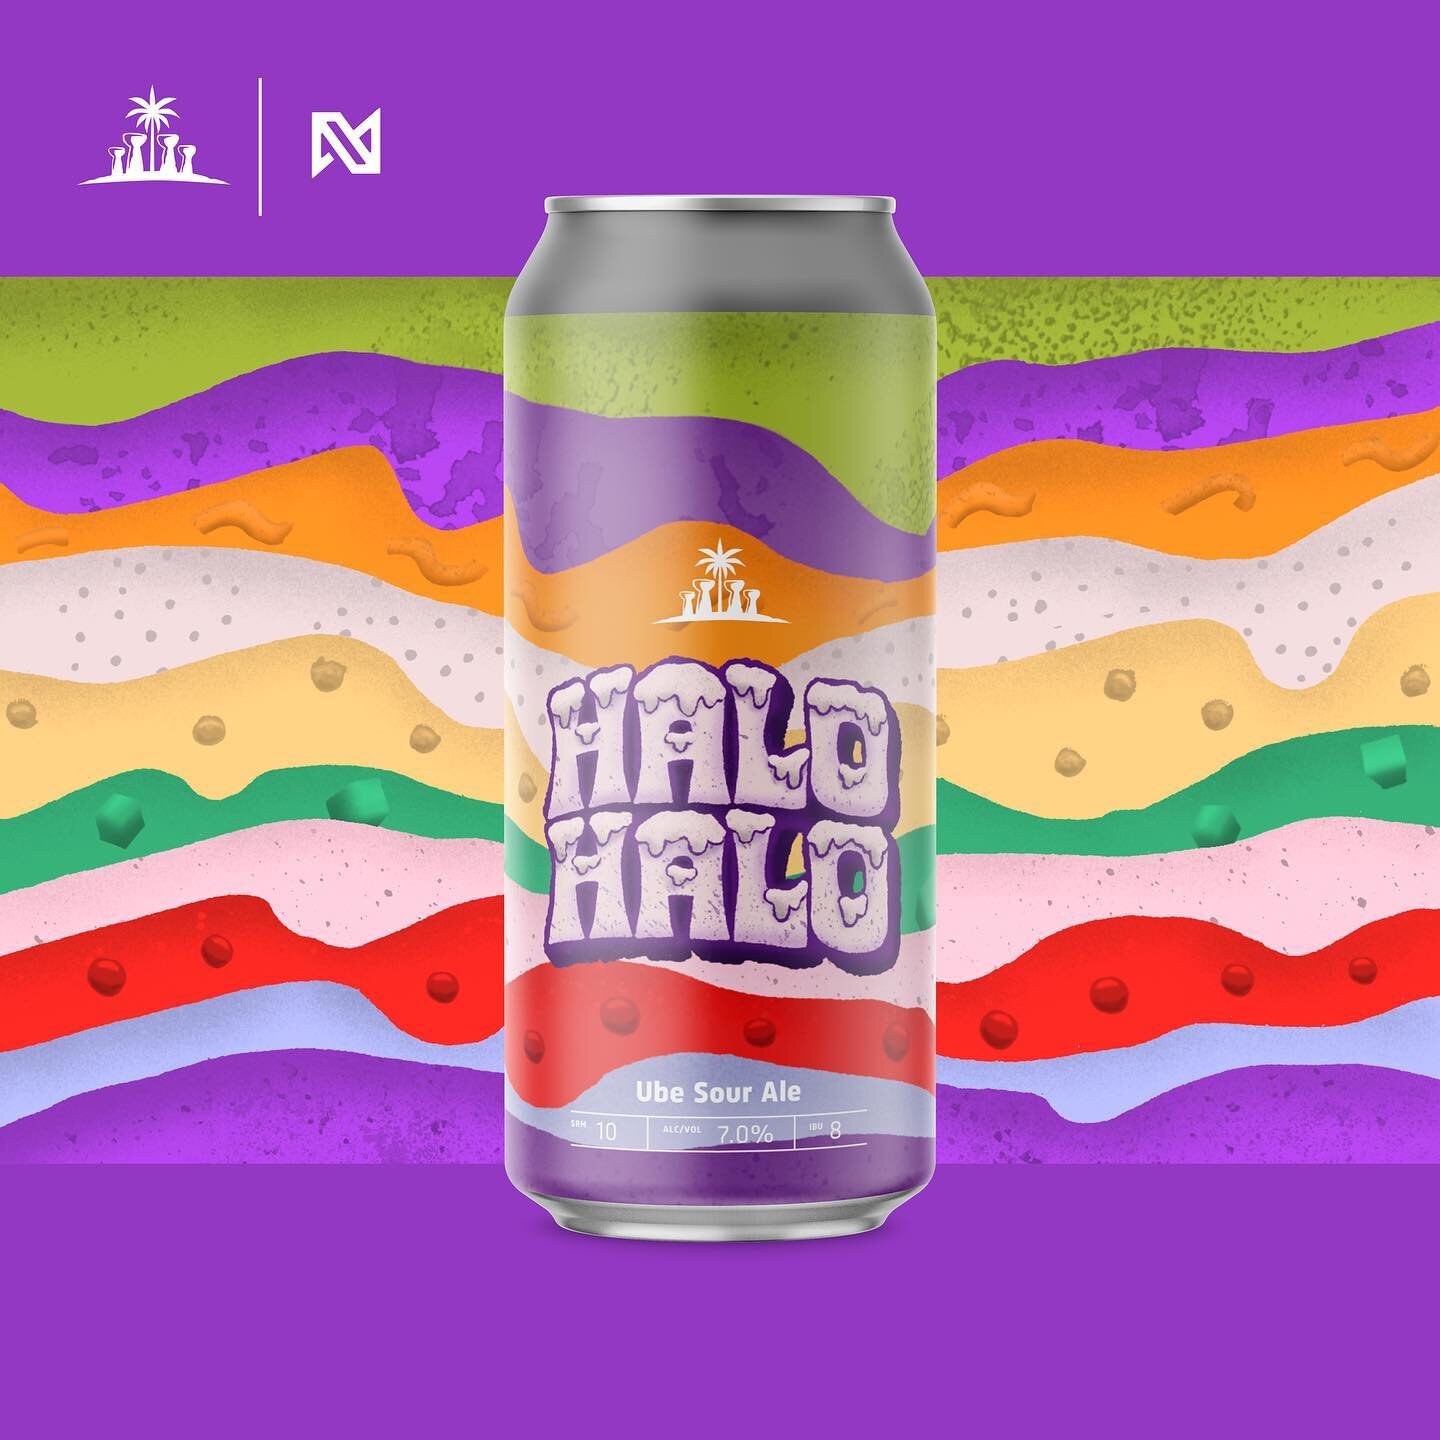 &quot;Thrilled to announce my exciting collaboration with The Guam Brewery @guambrewery! Together, we've crafted something truly special &ndash; the Halo-Halo Sour Ale. It's a celebration of flavors and cultures, a beer inspired by the iconic Filipin